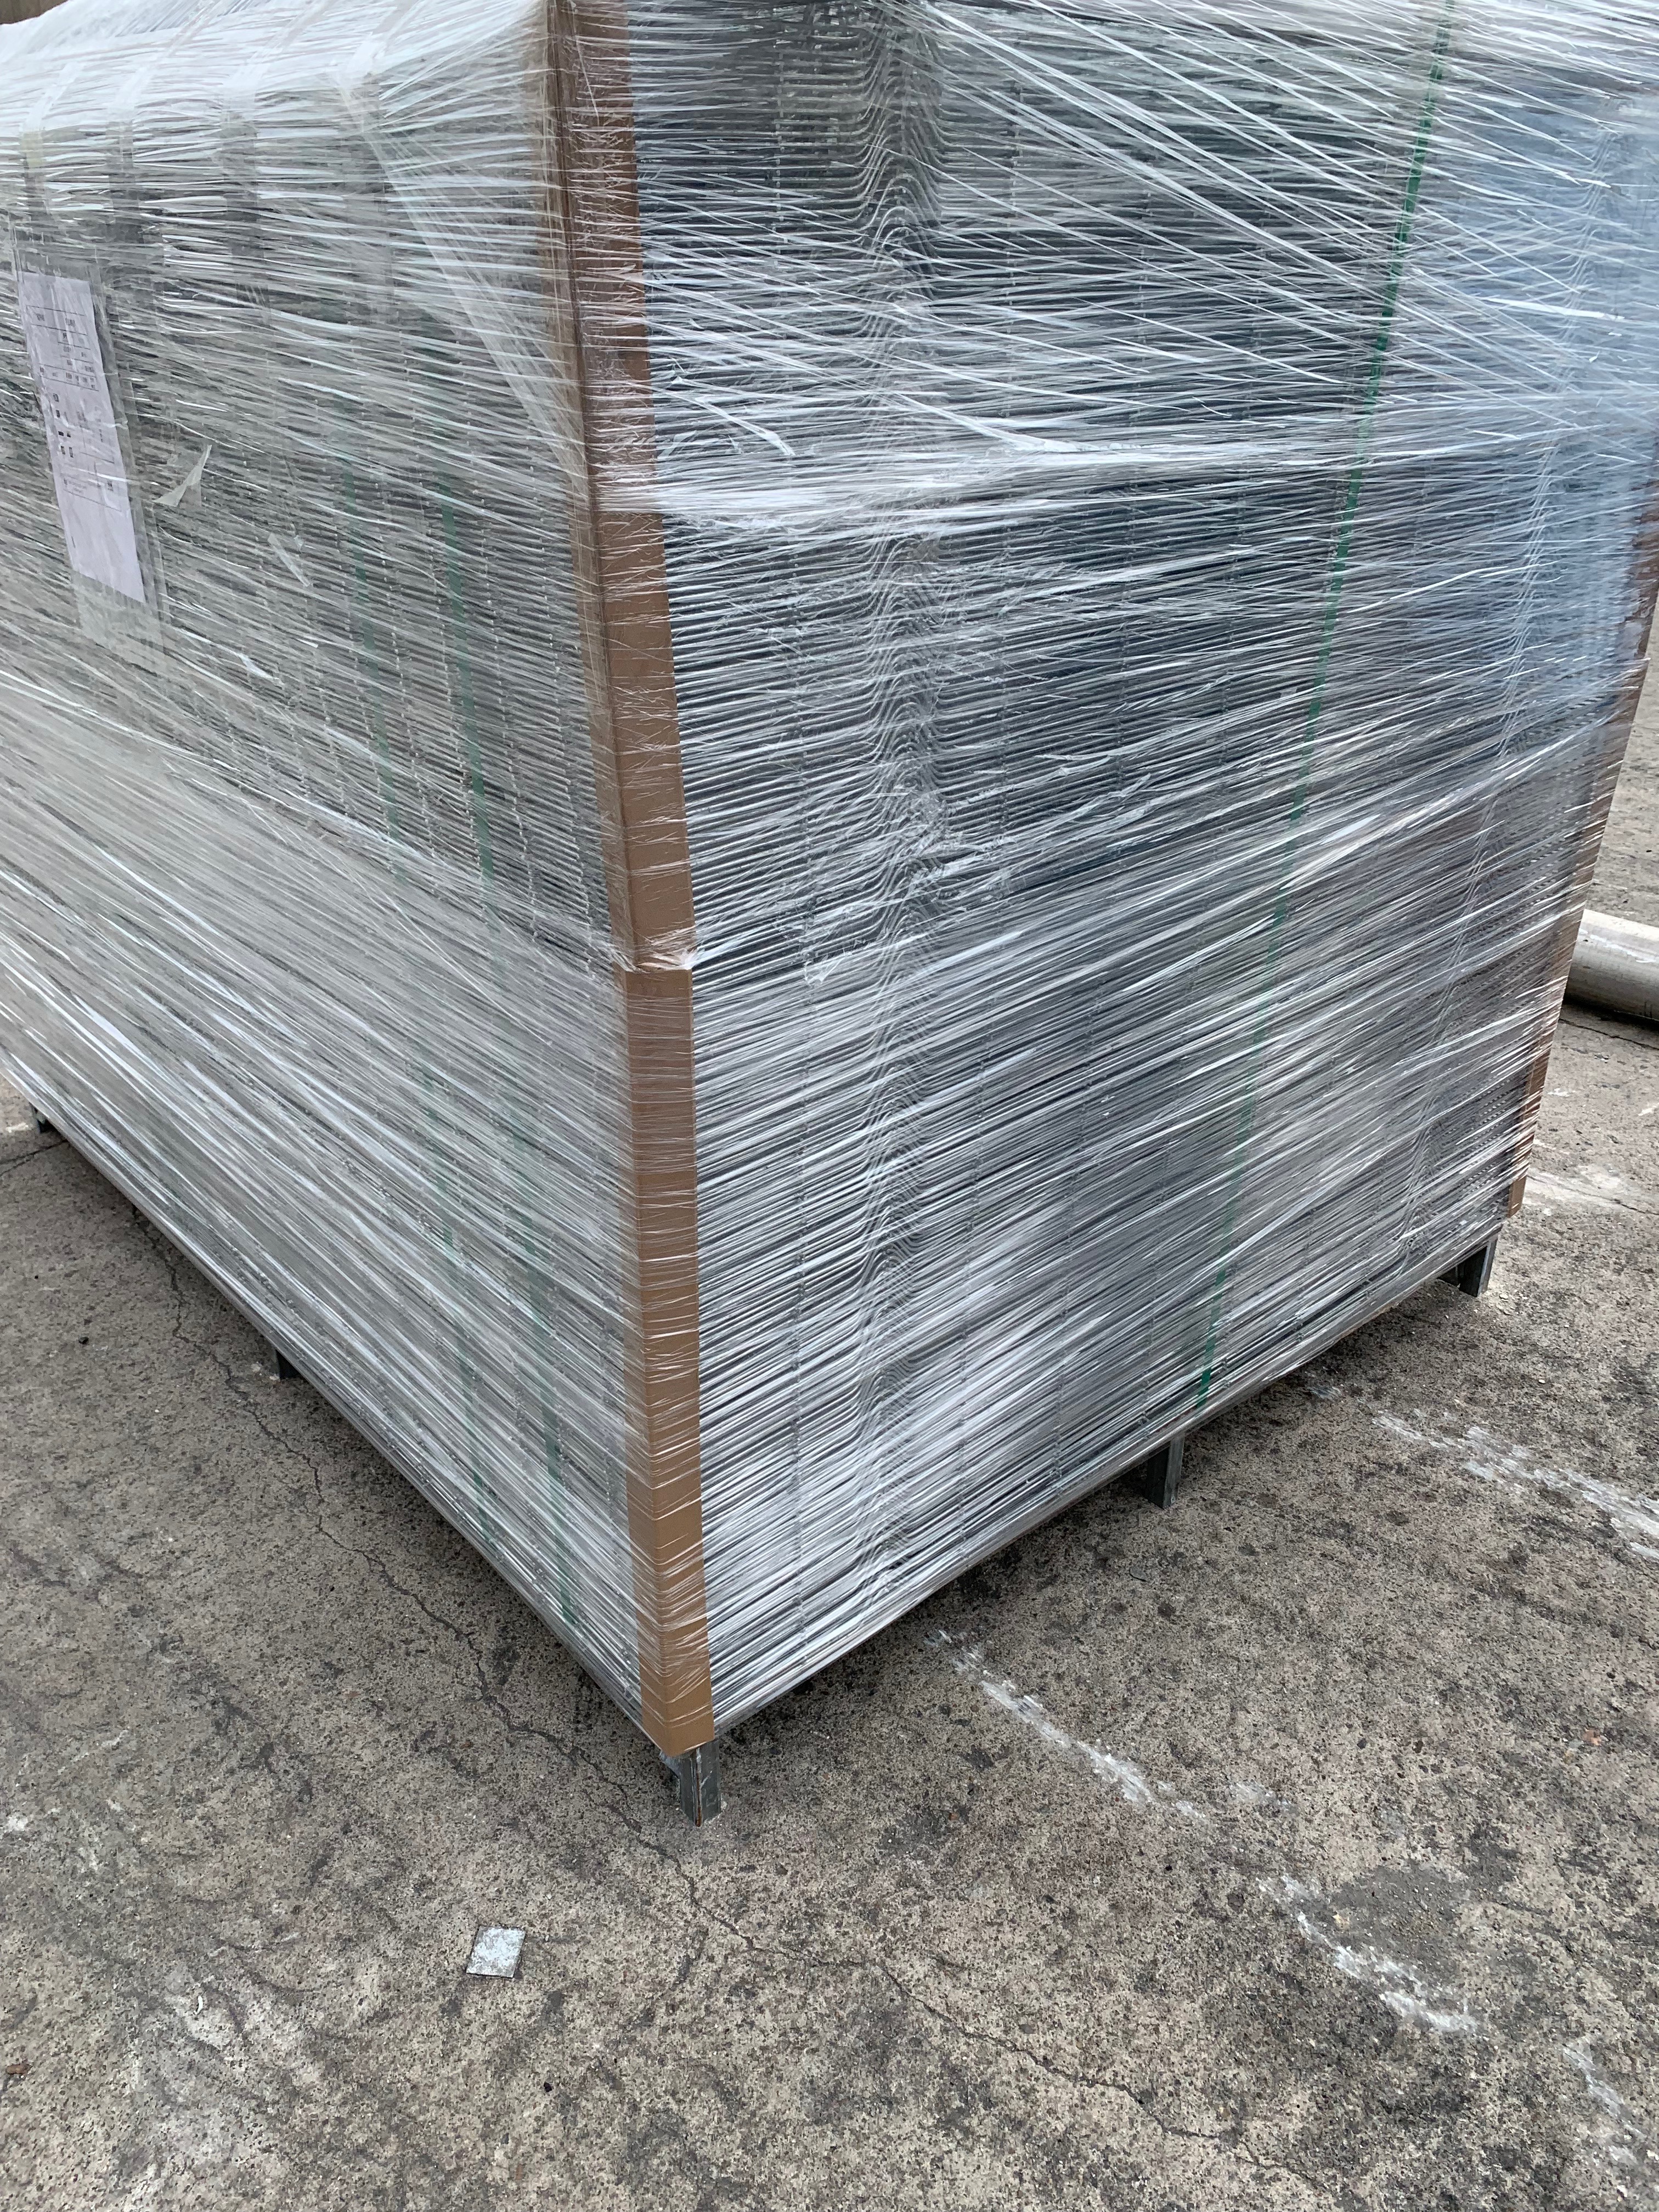 Hot Dipped Galvanized Mesh Fence